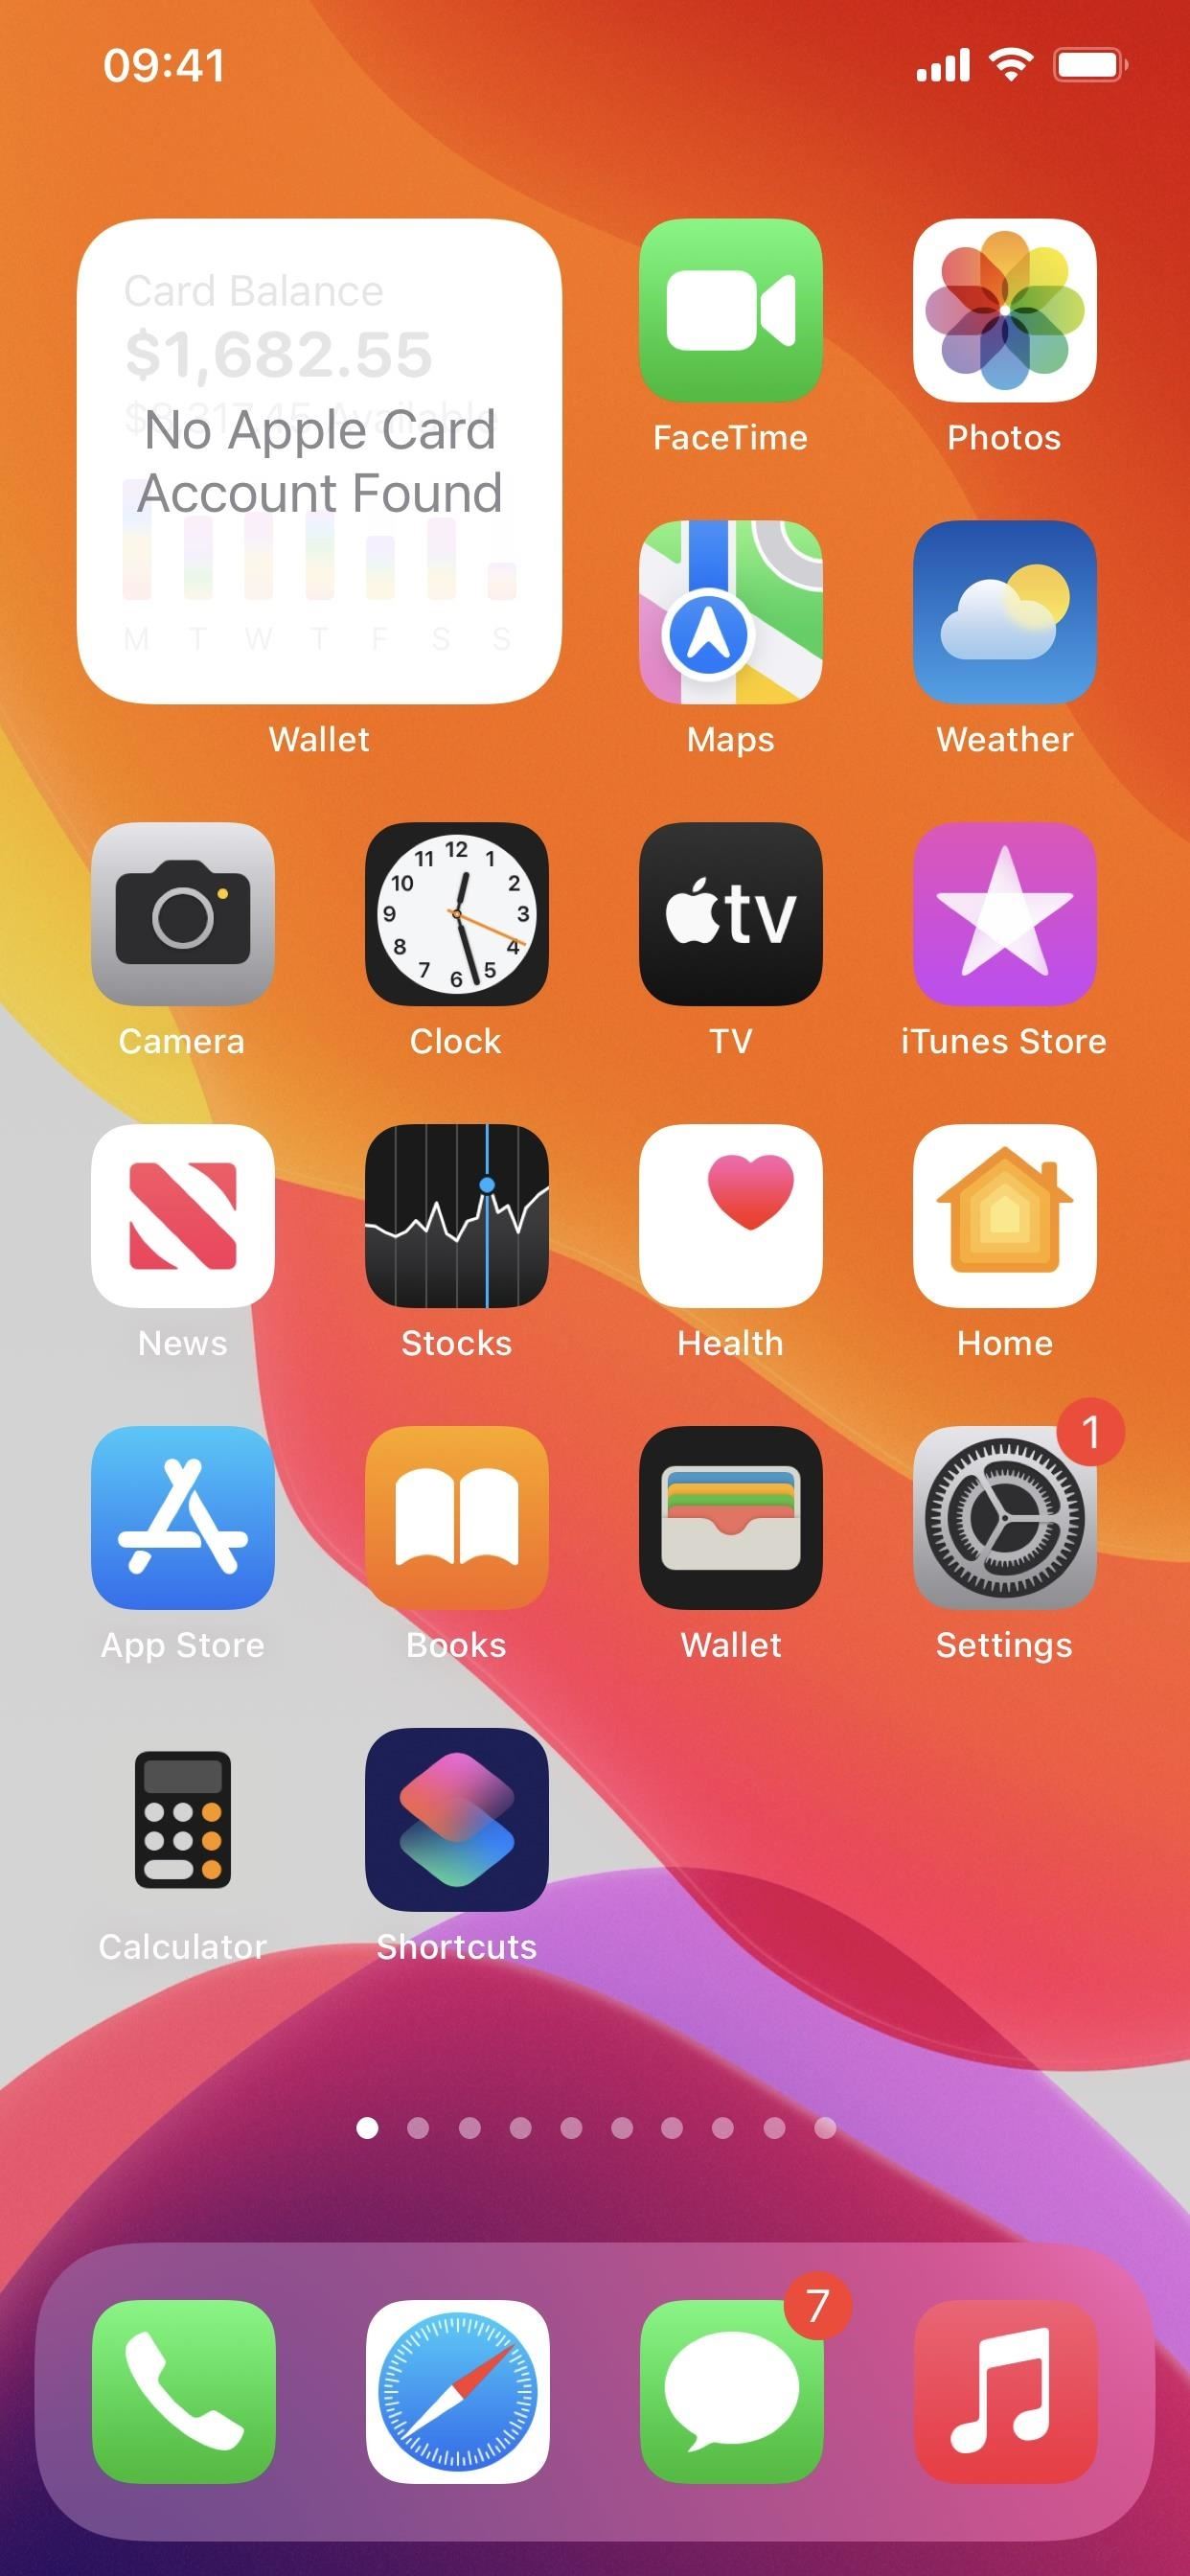 42 Cool New iOS 15.4 Features for iPhone — App Updates, Hidden Changes, and More!